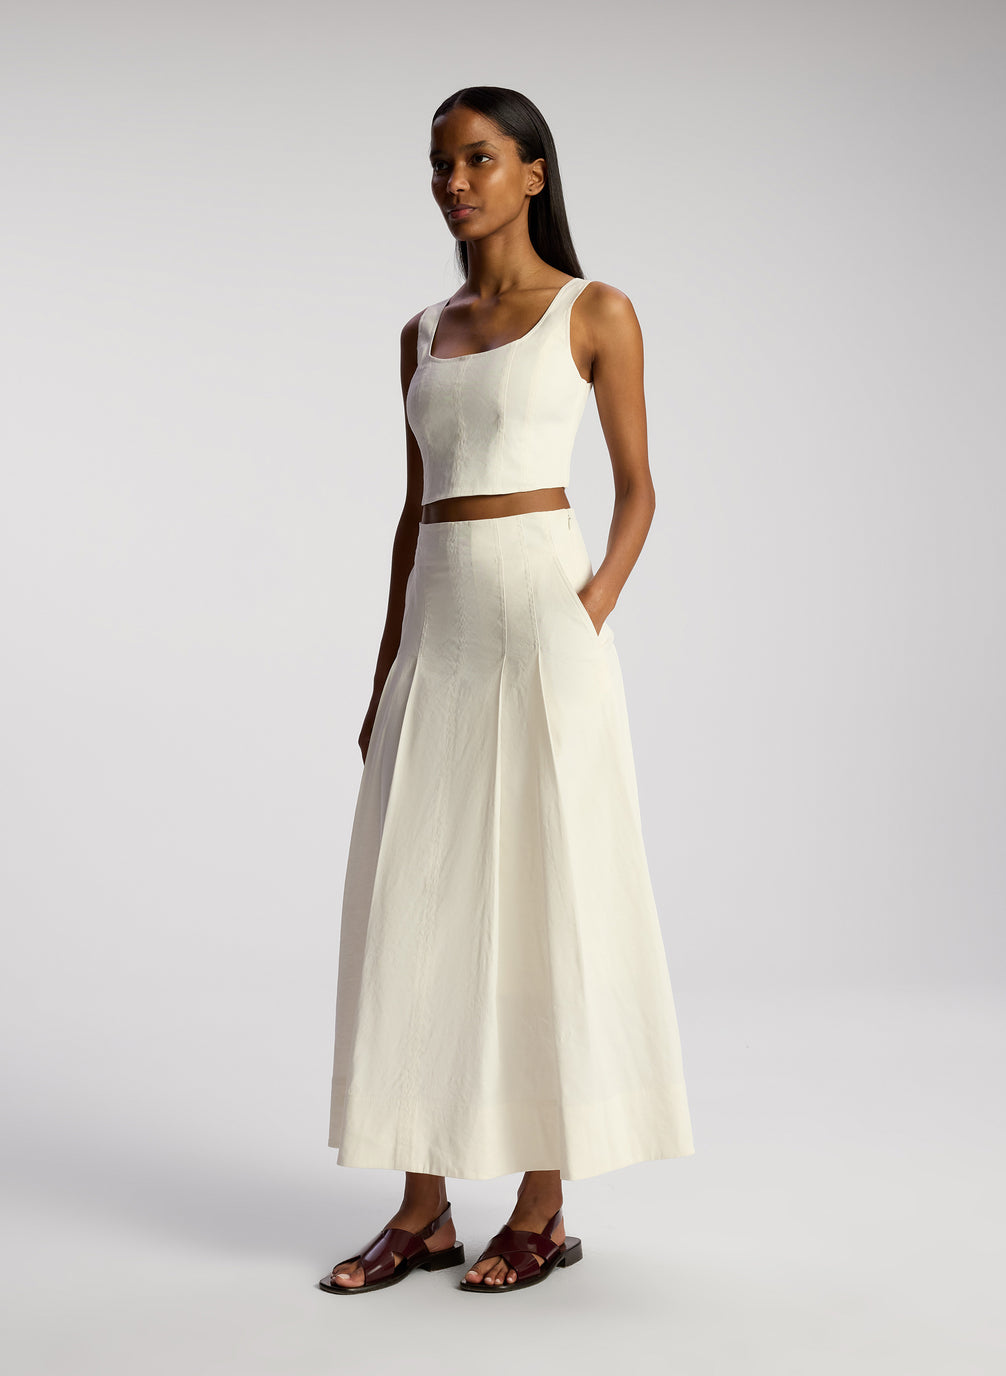 side view of woman wearing white sleeveless cropped top and white midi skirt